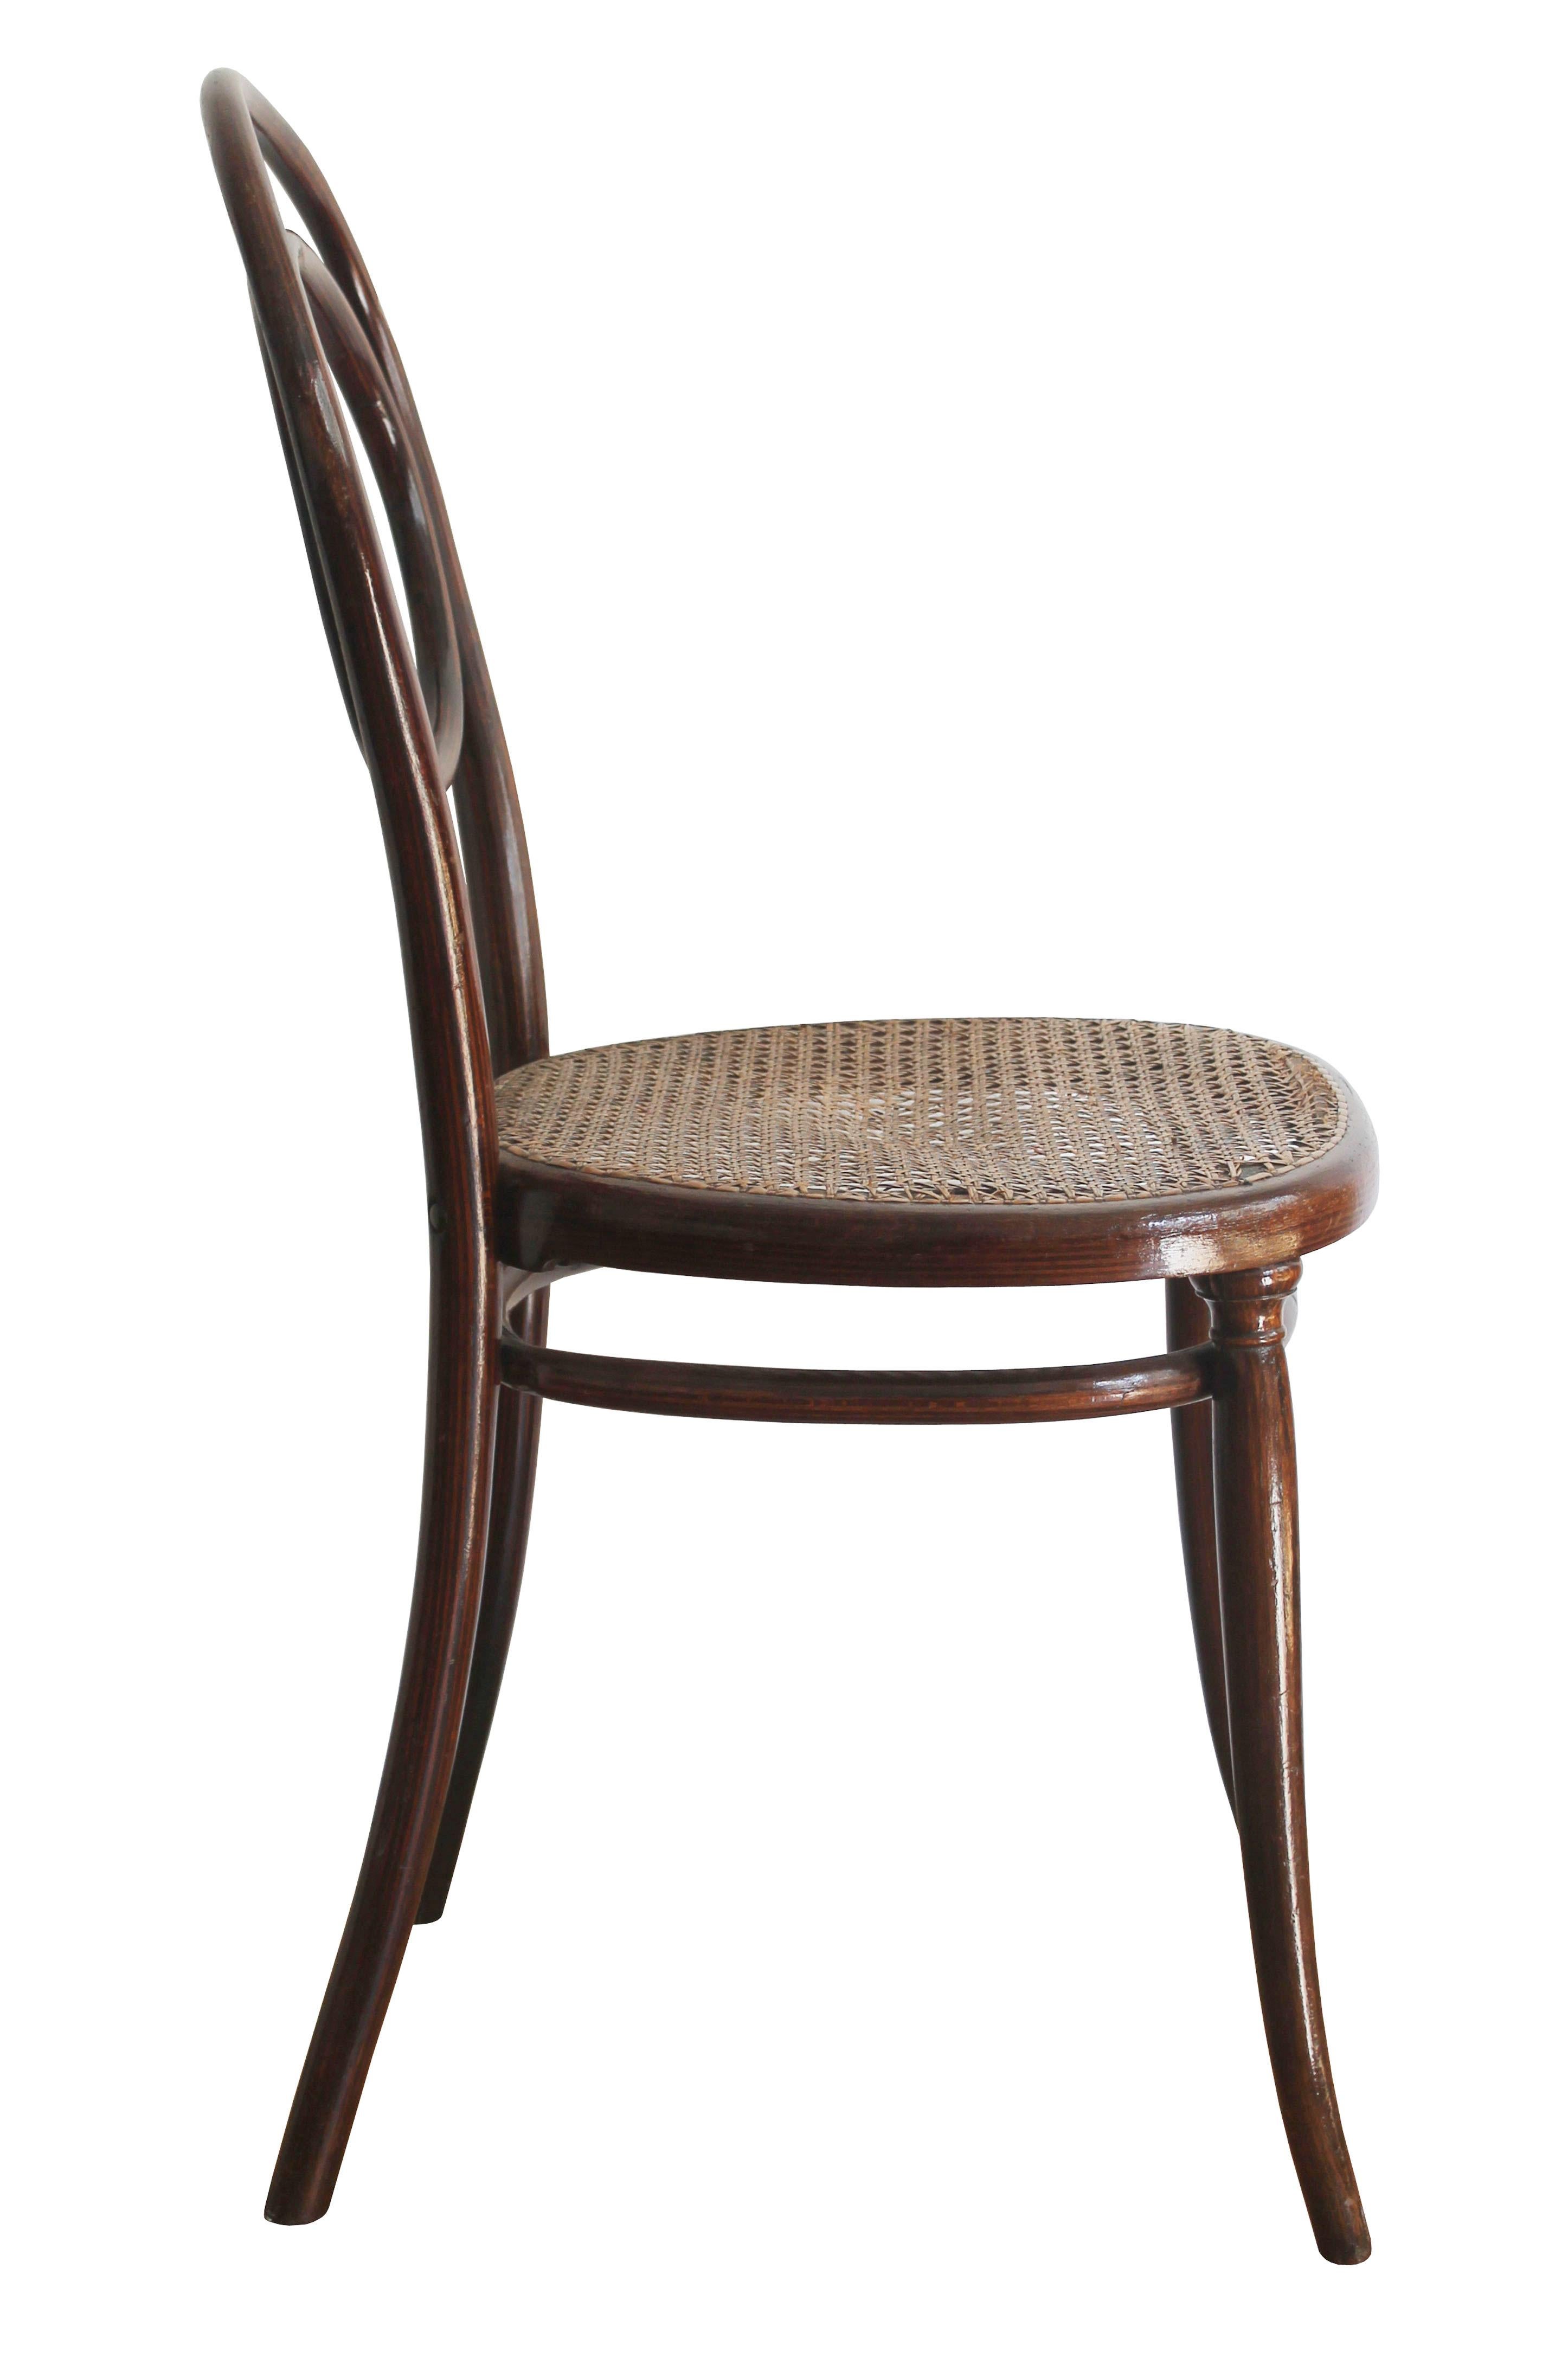 Austrian Thonet Dining Chair Model No.10 from the 1880's For Sale